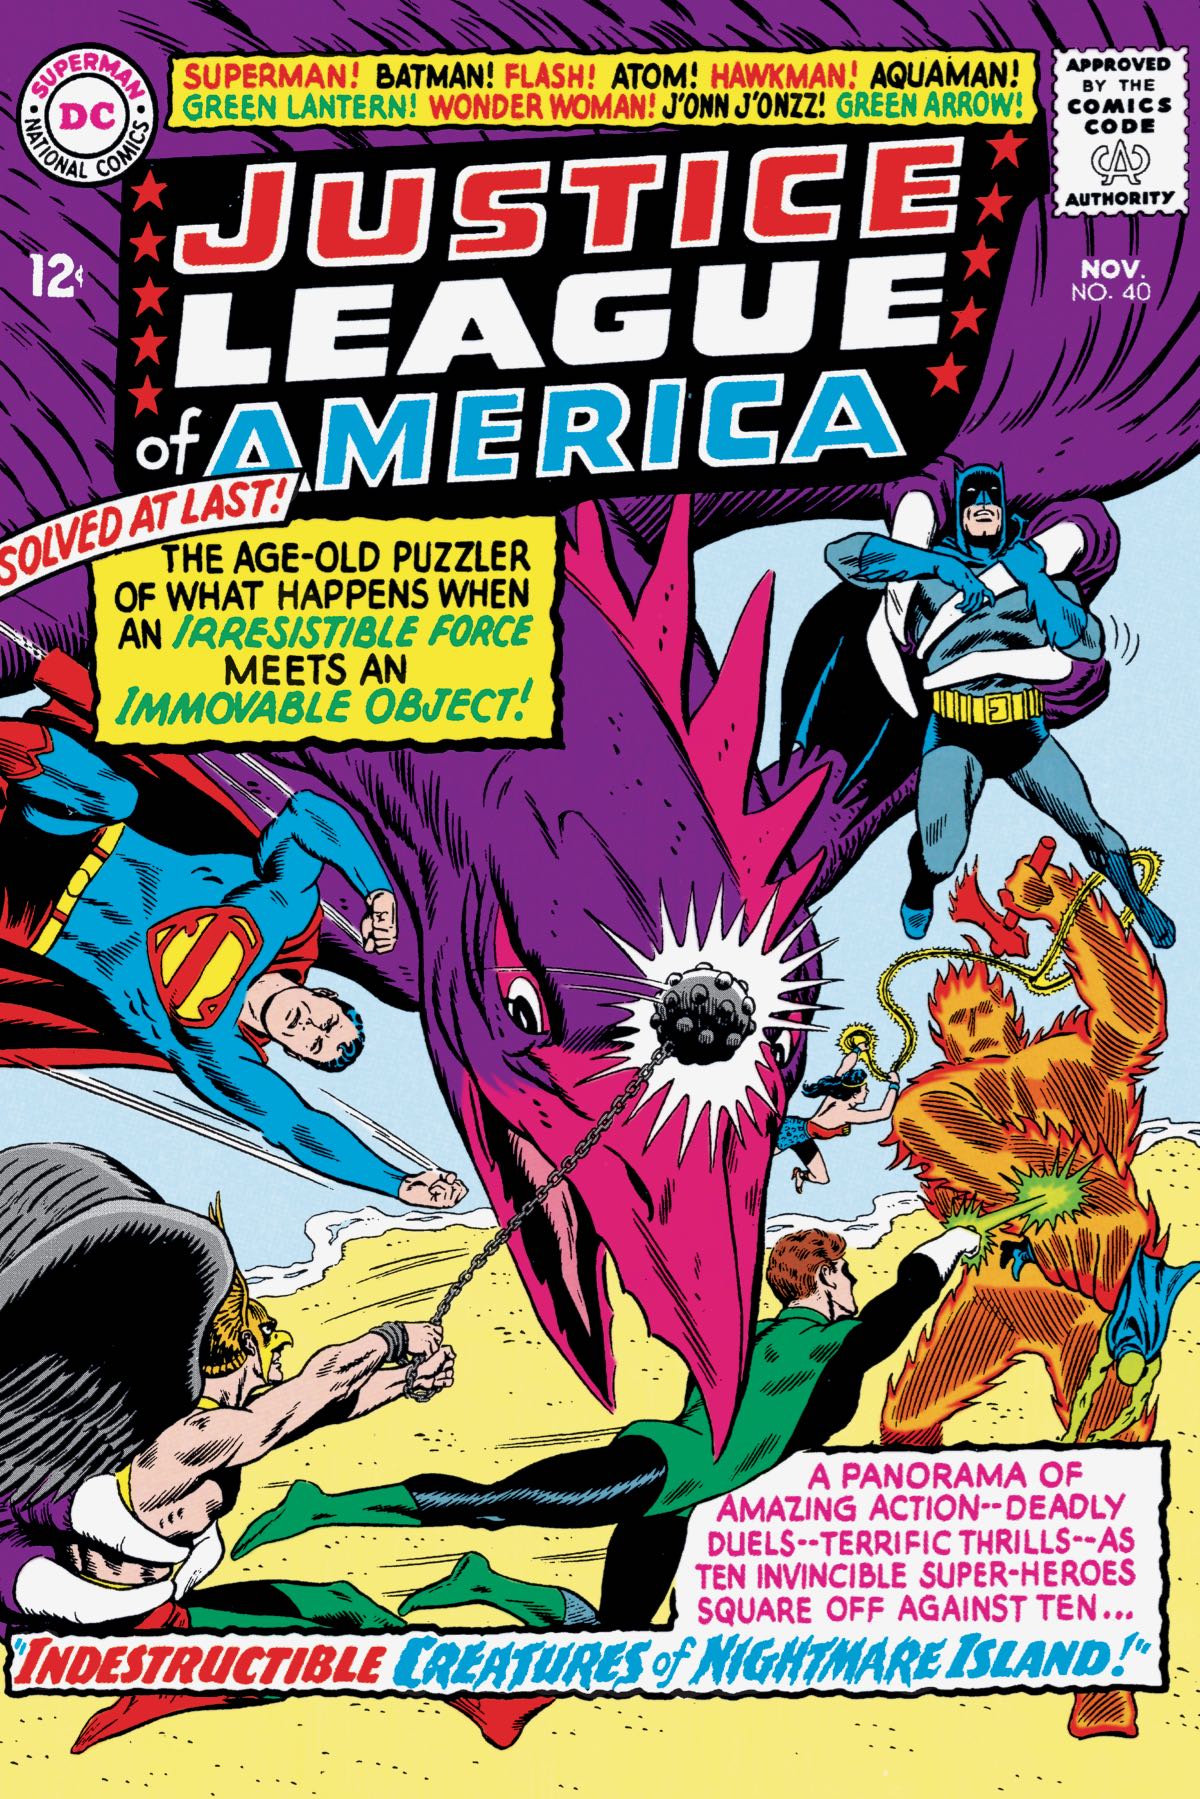 JUSTICE LEAGUE OF AMERICA: THE SILVER AGE VOL. 4 TP